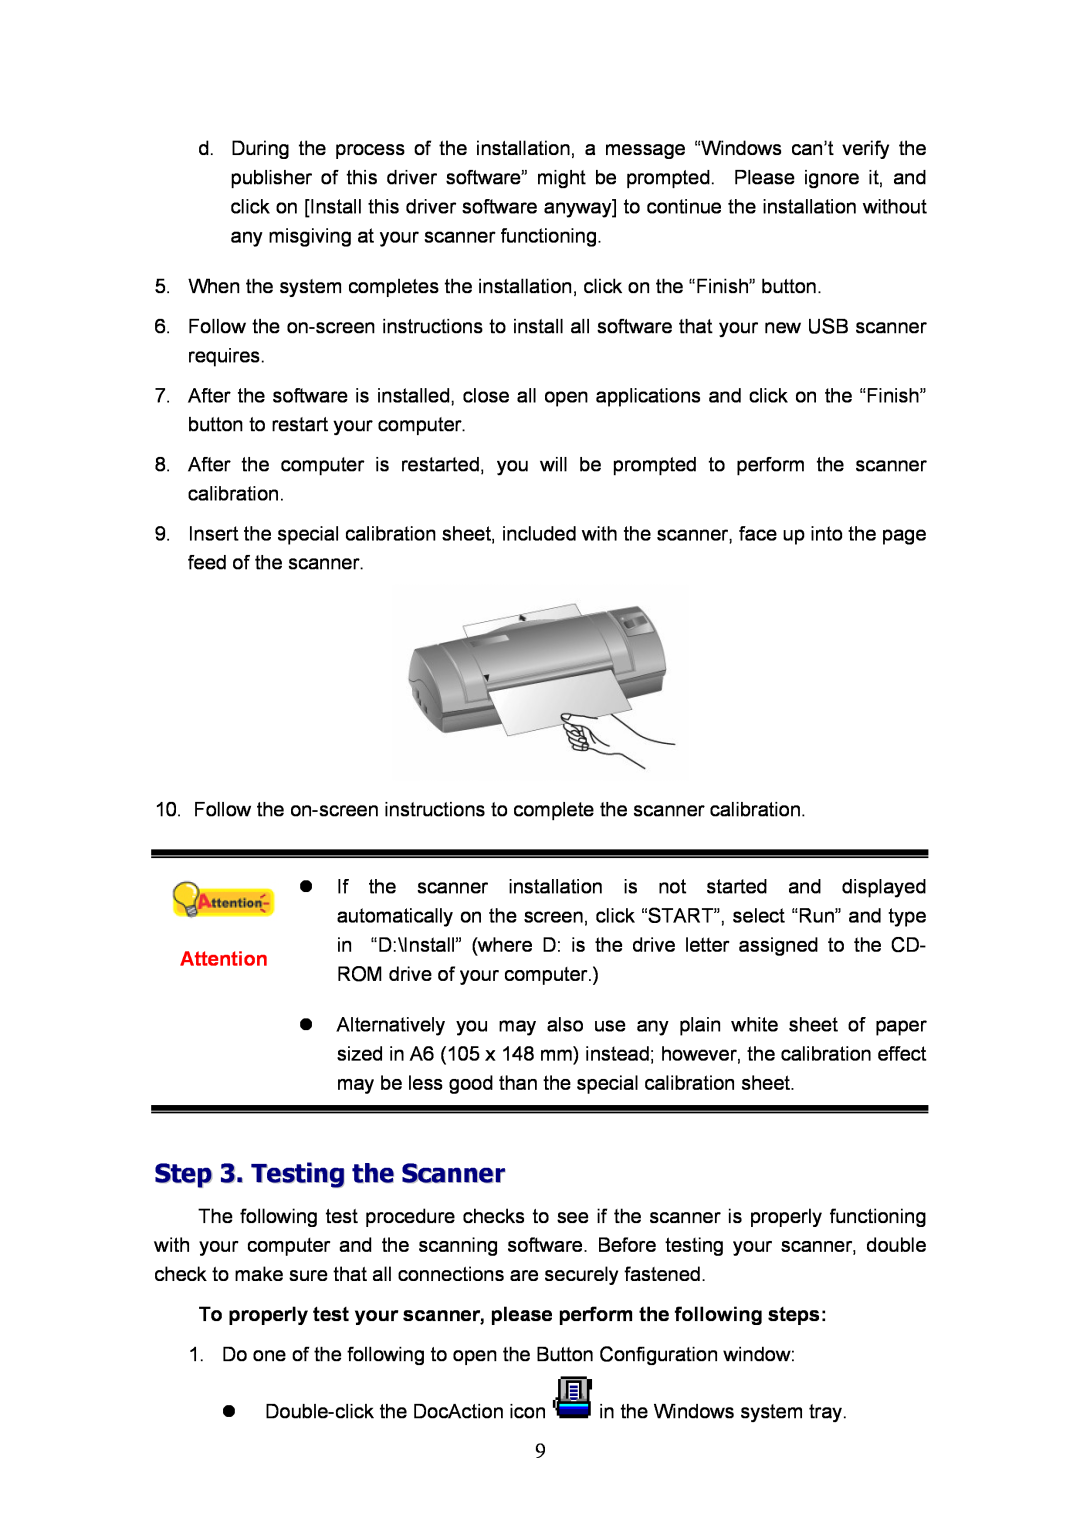 Plustek MobileOffice Scanner, D600 Testing the Scanner, To properly test your scanner, please perform the following steps 